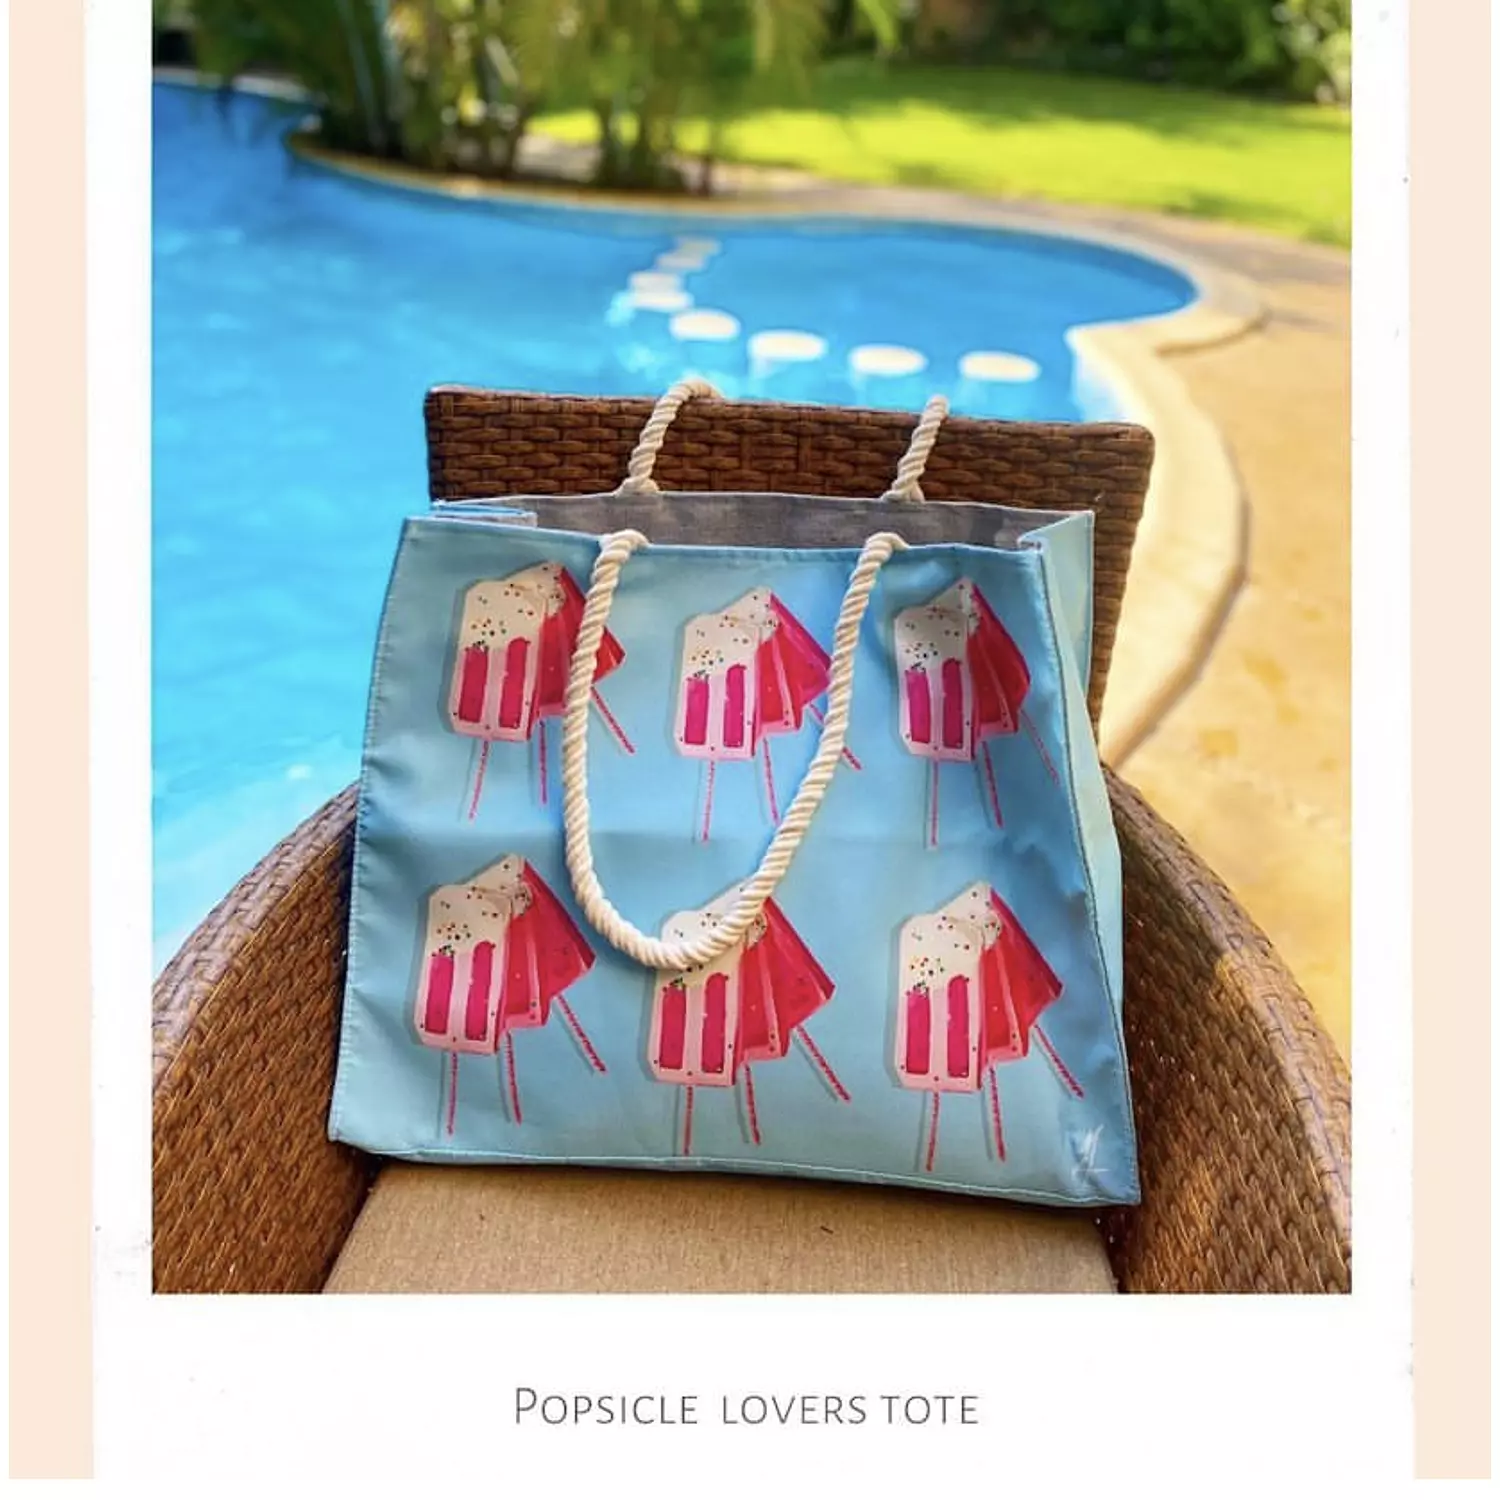 The Popsicle Hand-Painted Fabric Tote (by order) hover image